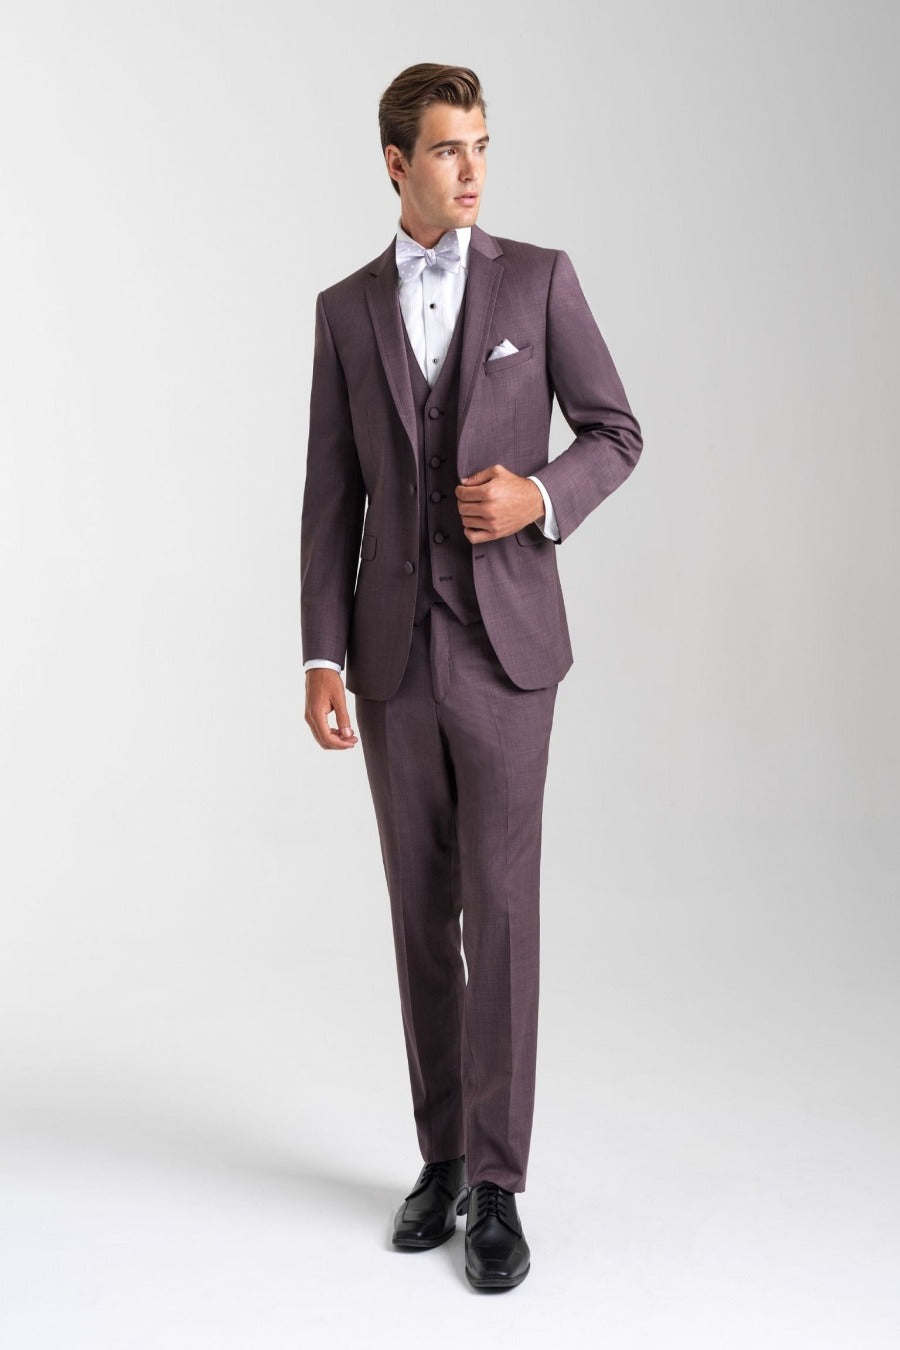 Mulberry Buckle Pants by Allure Men